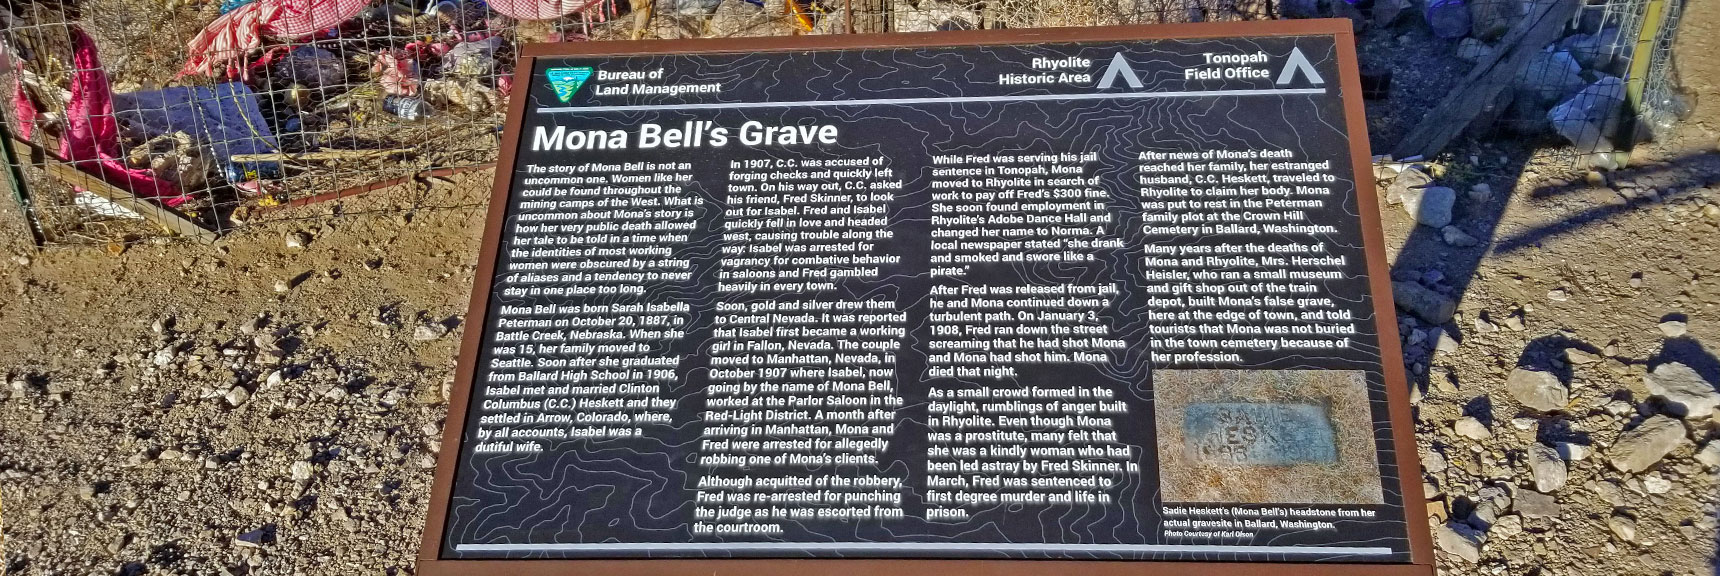 Mona Bell's Grave Interpretive Sign | Rhyolite Ghost Town | Death Valley Area, Nevada